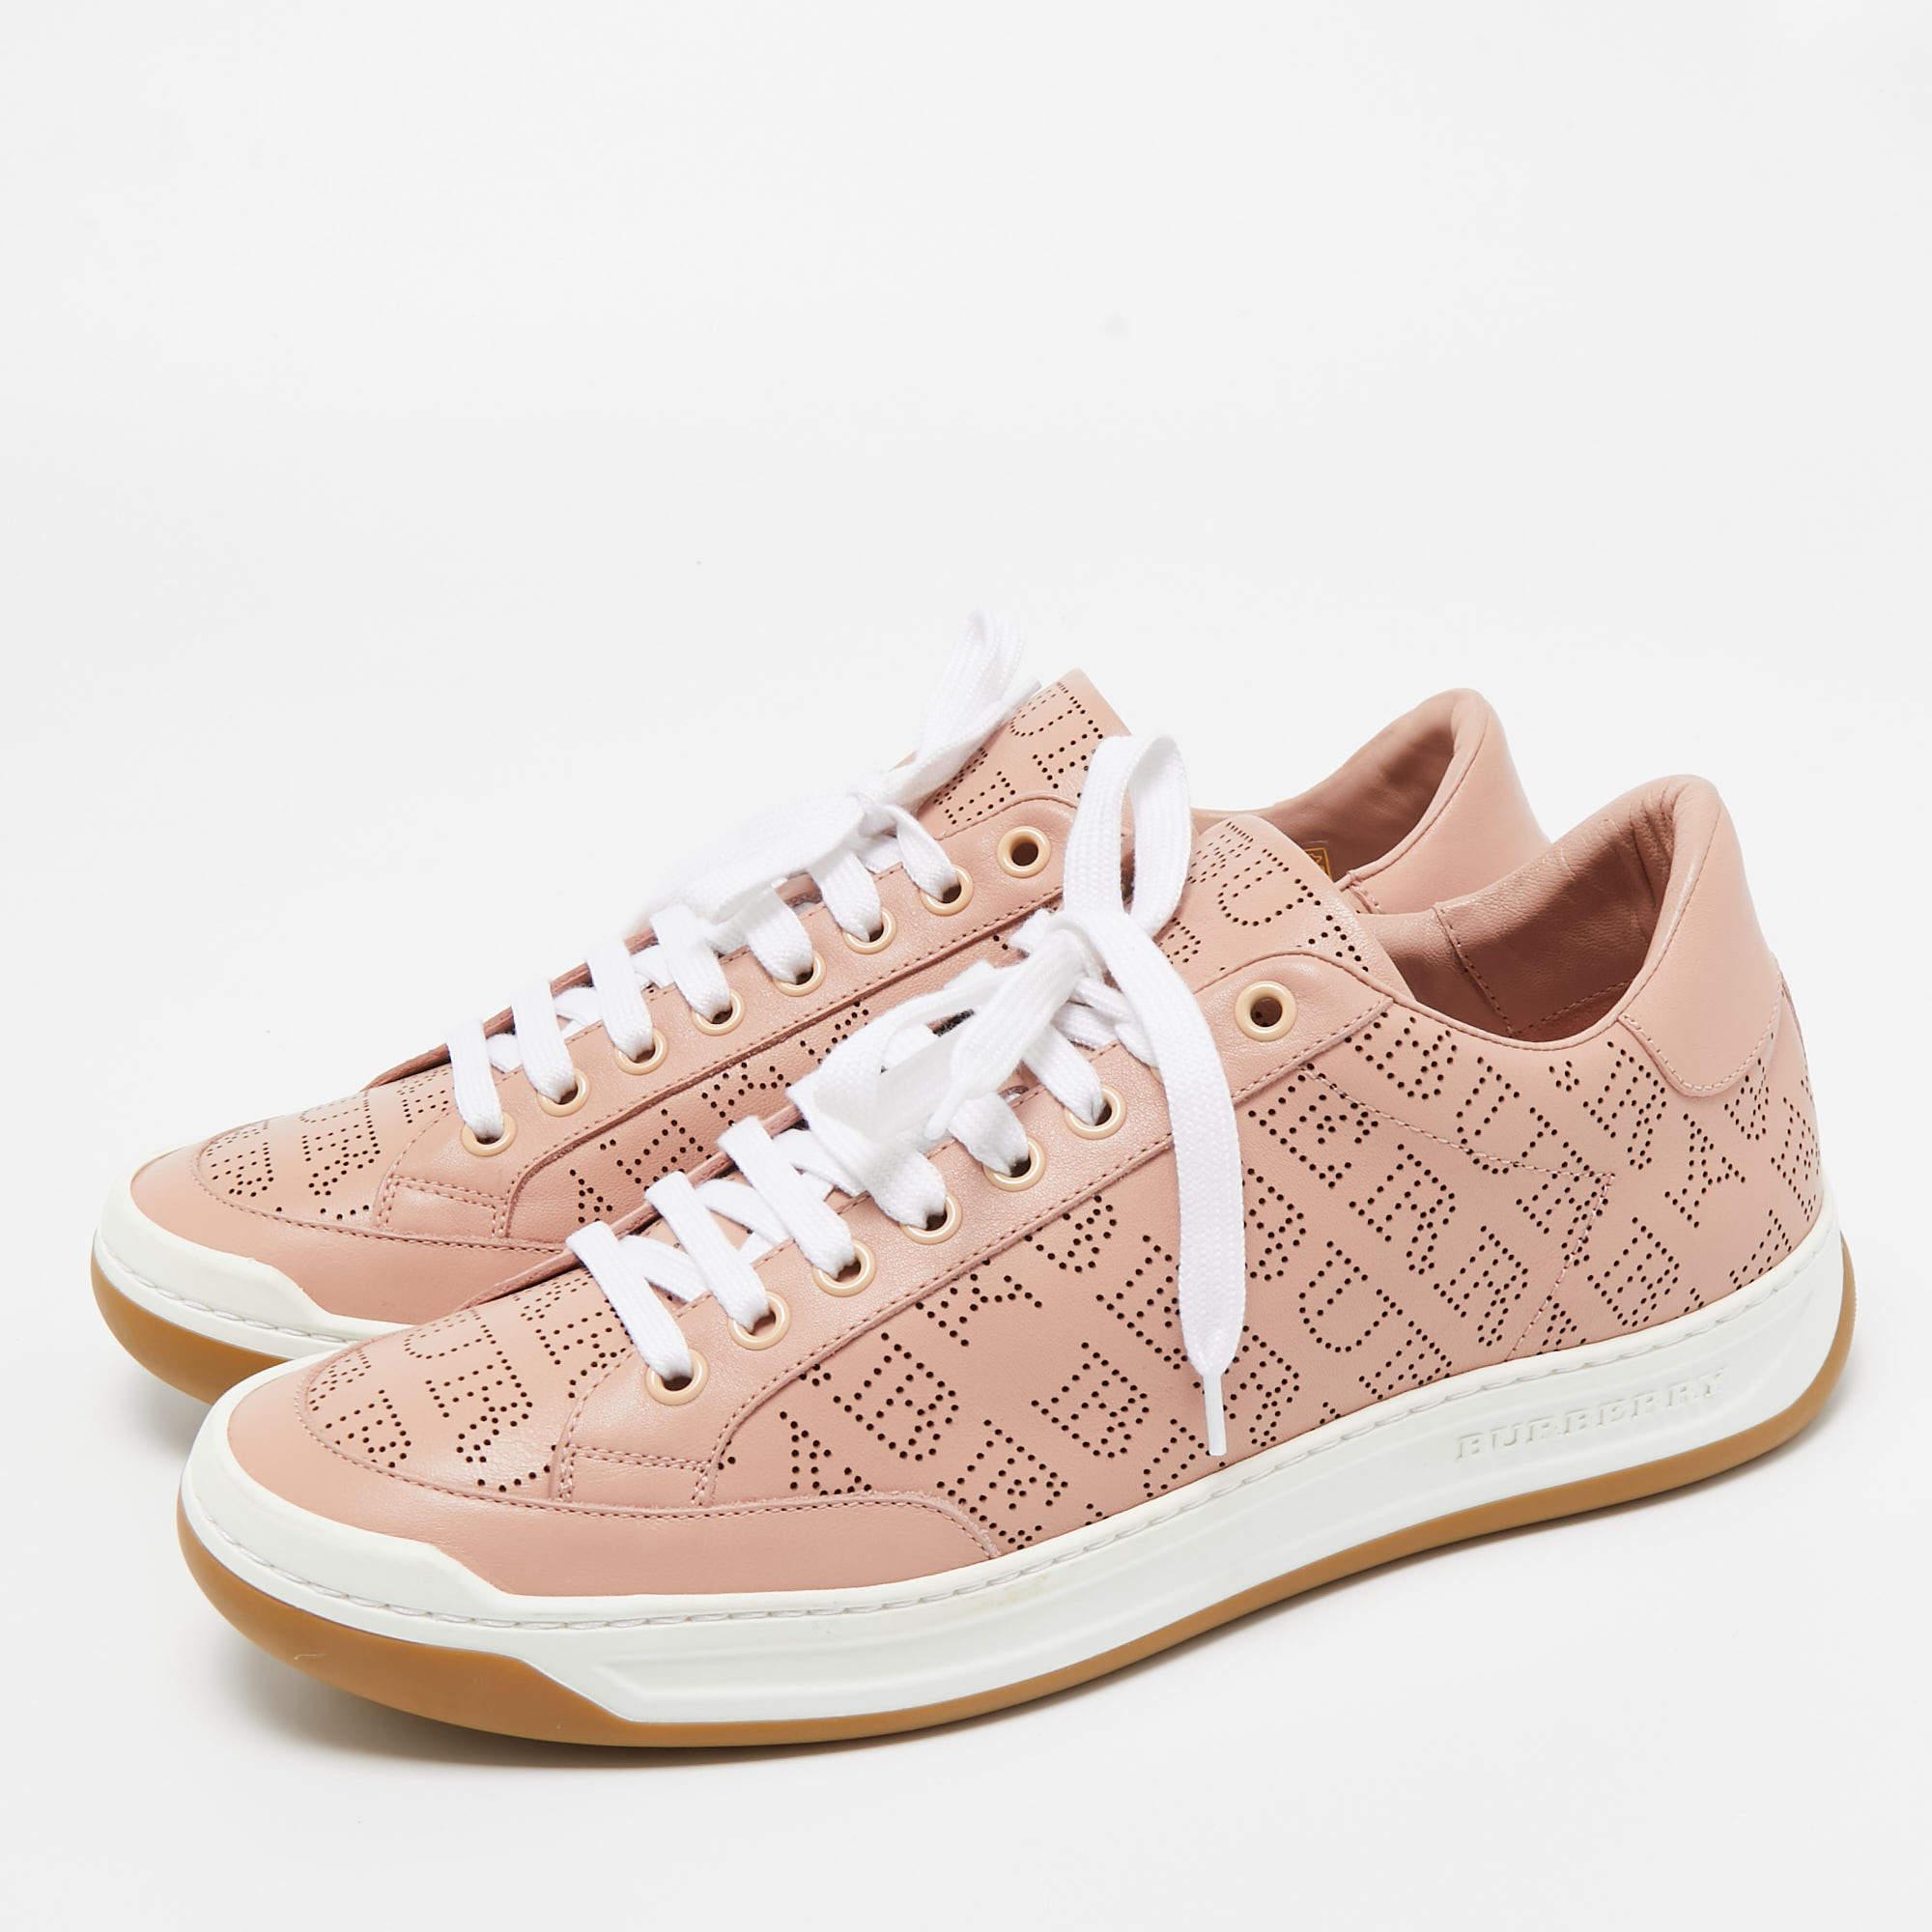 Baskets basses Westford roses Burberry, taille 41 1